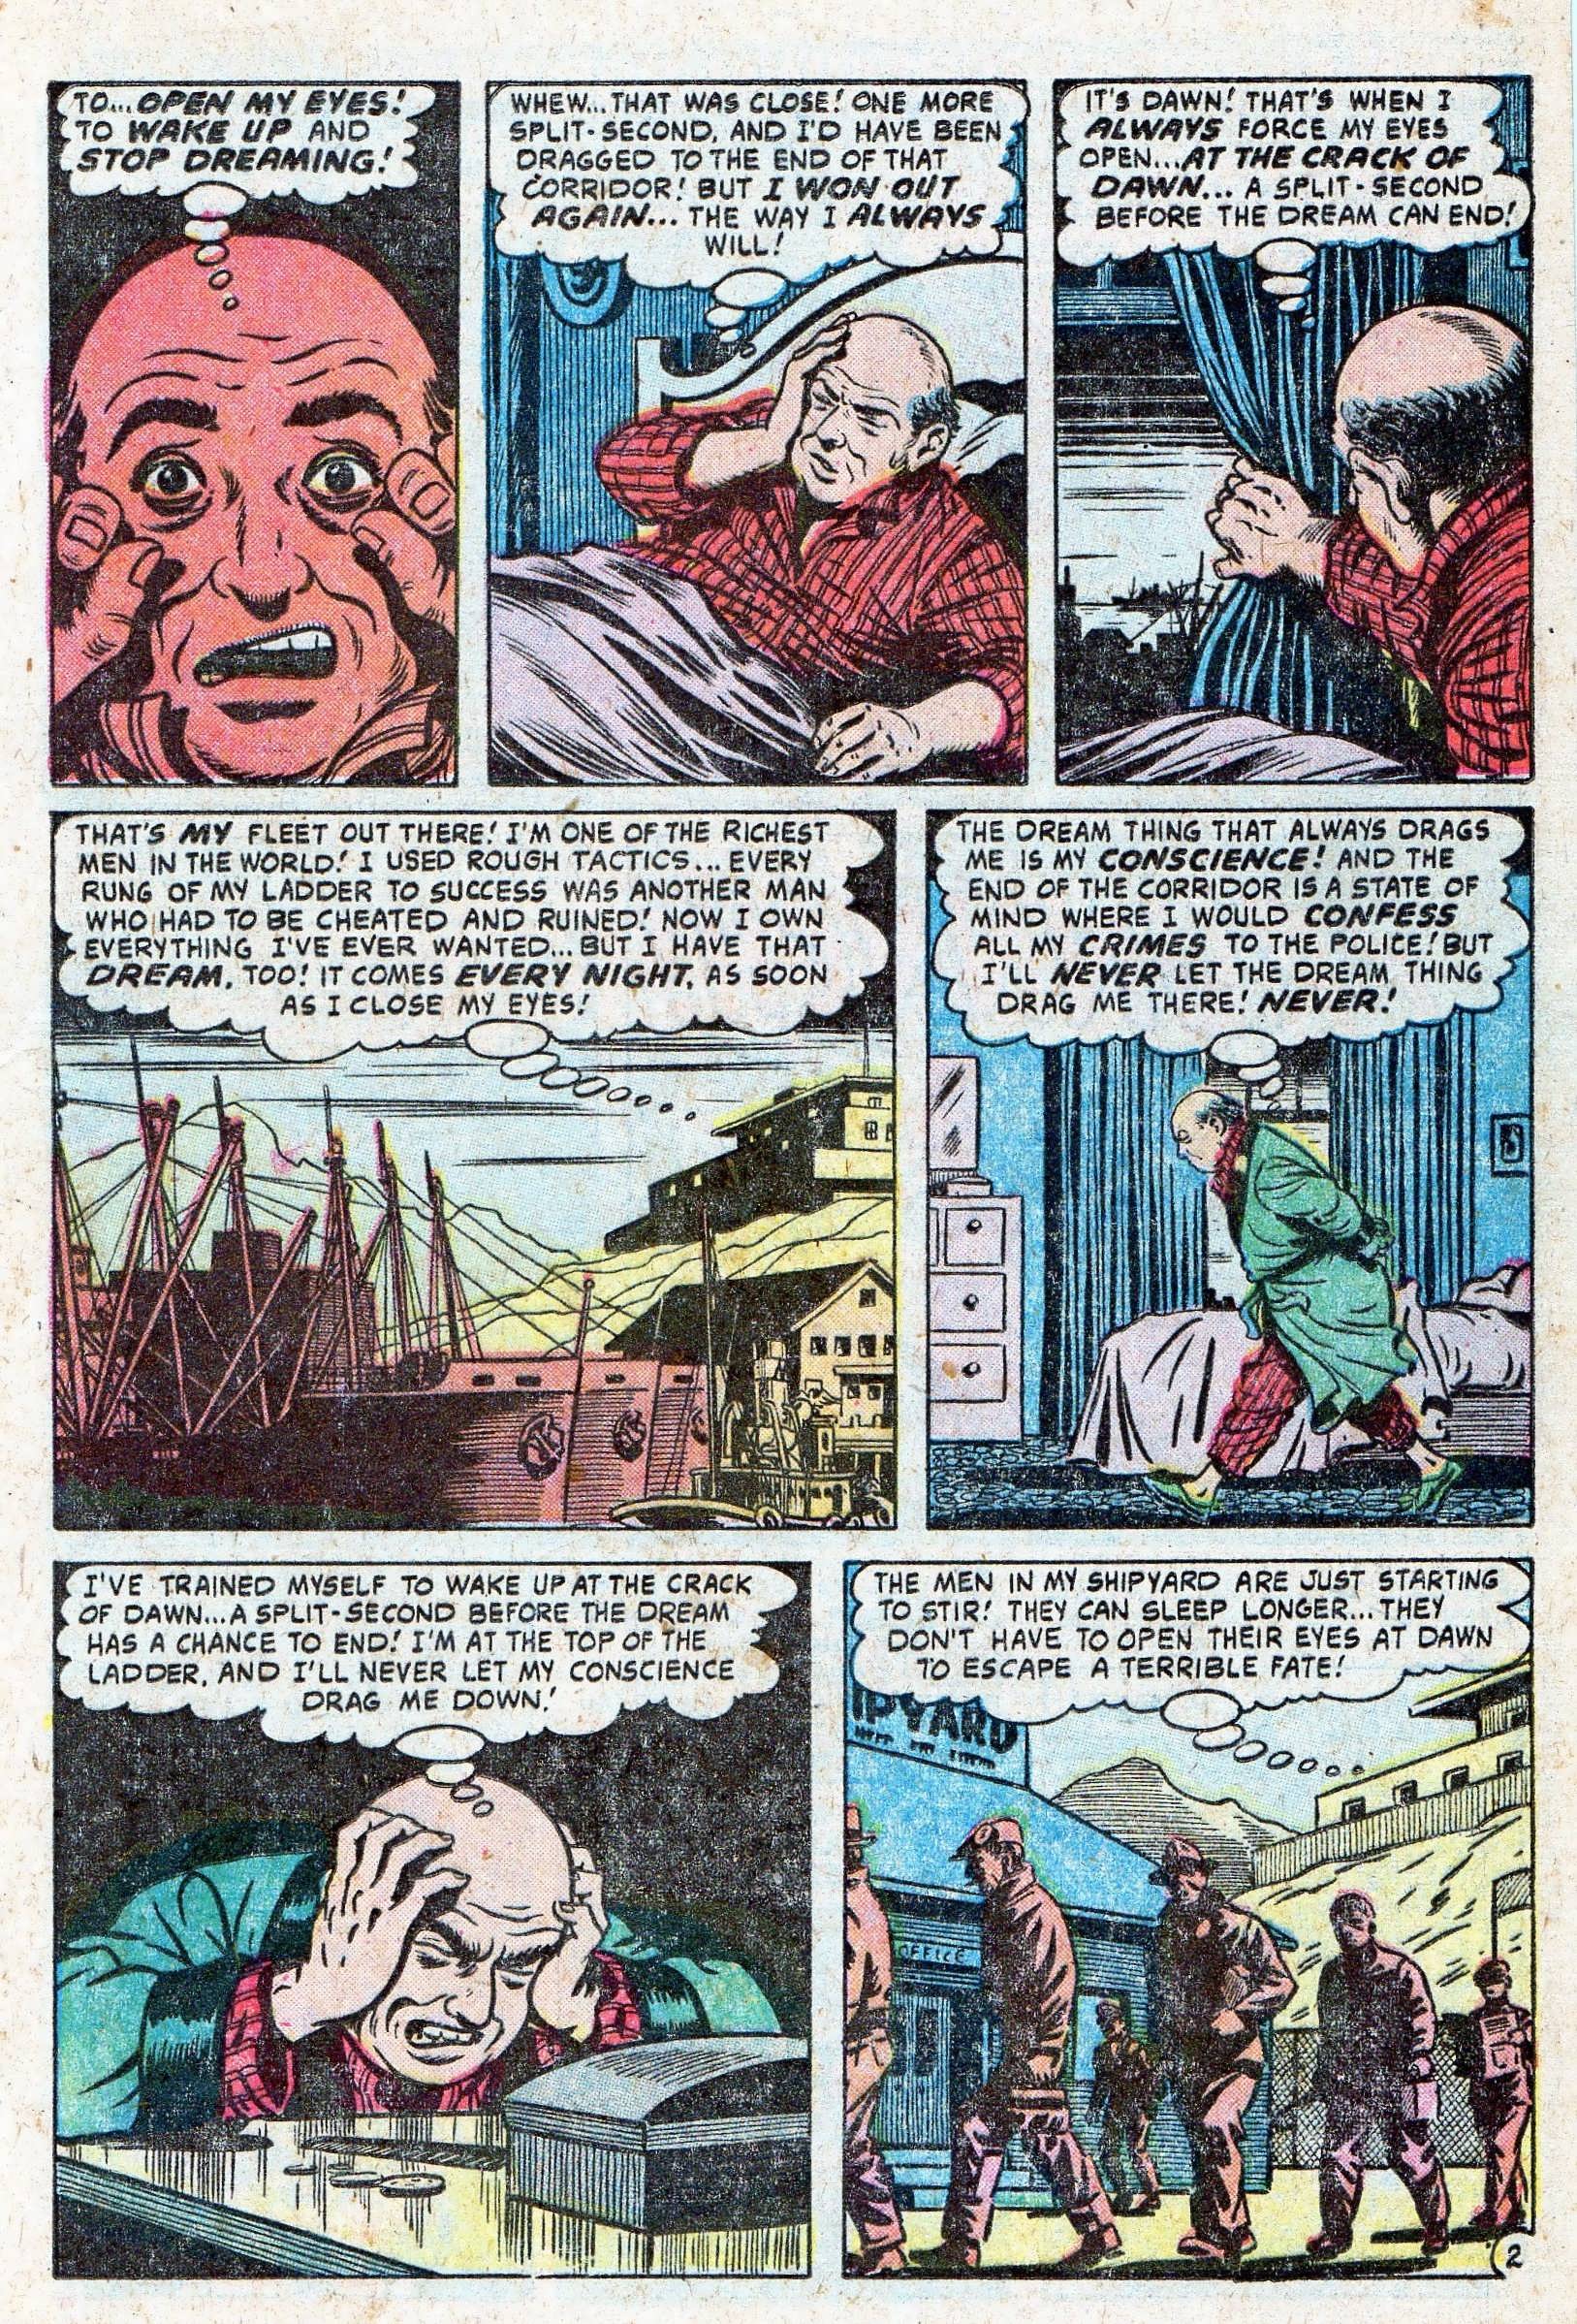 Marvel Tales (1949) 155 Page 12